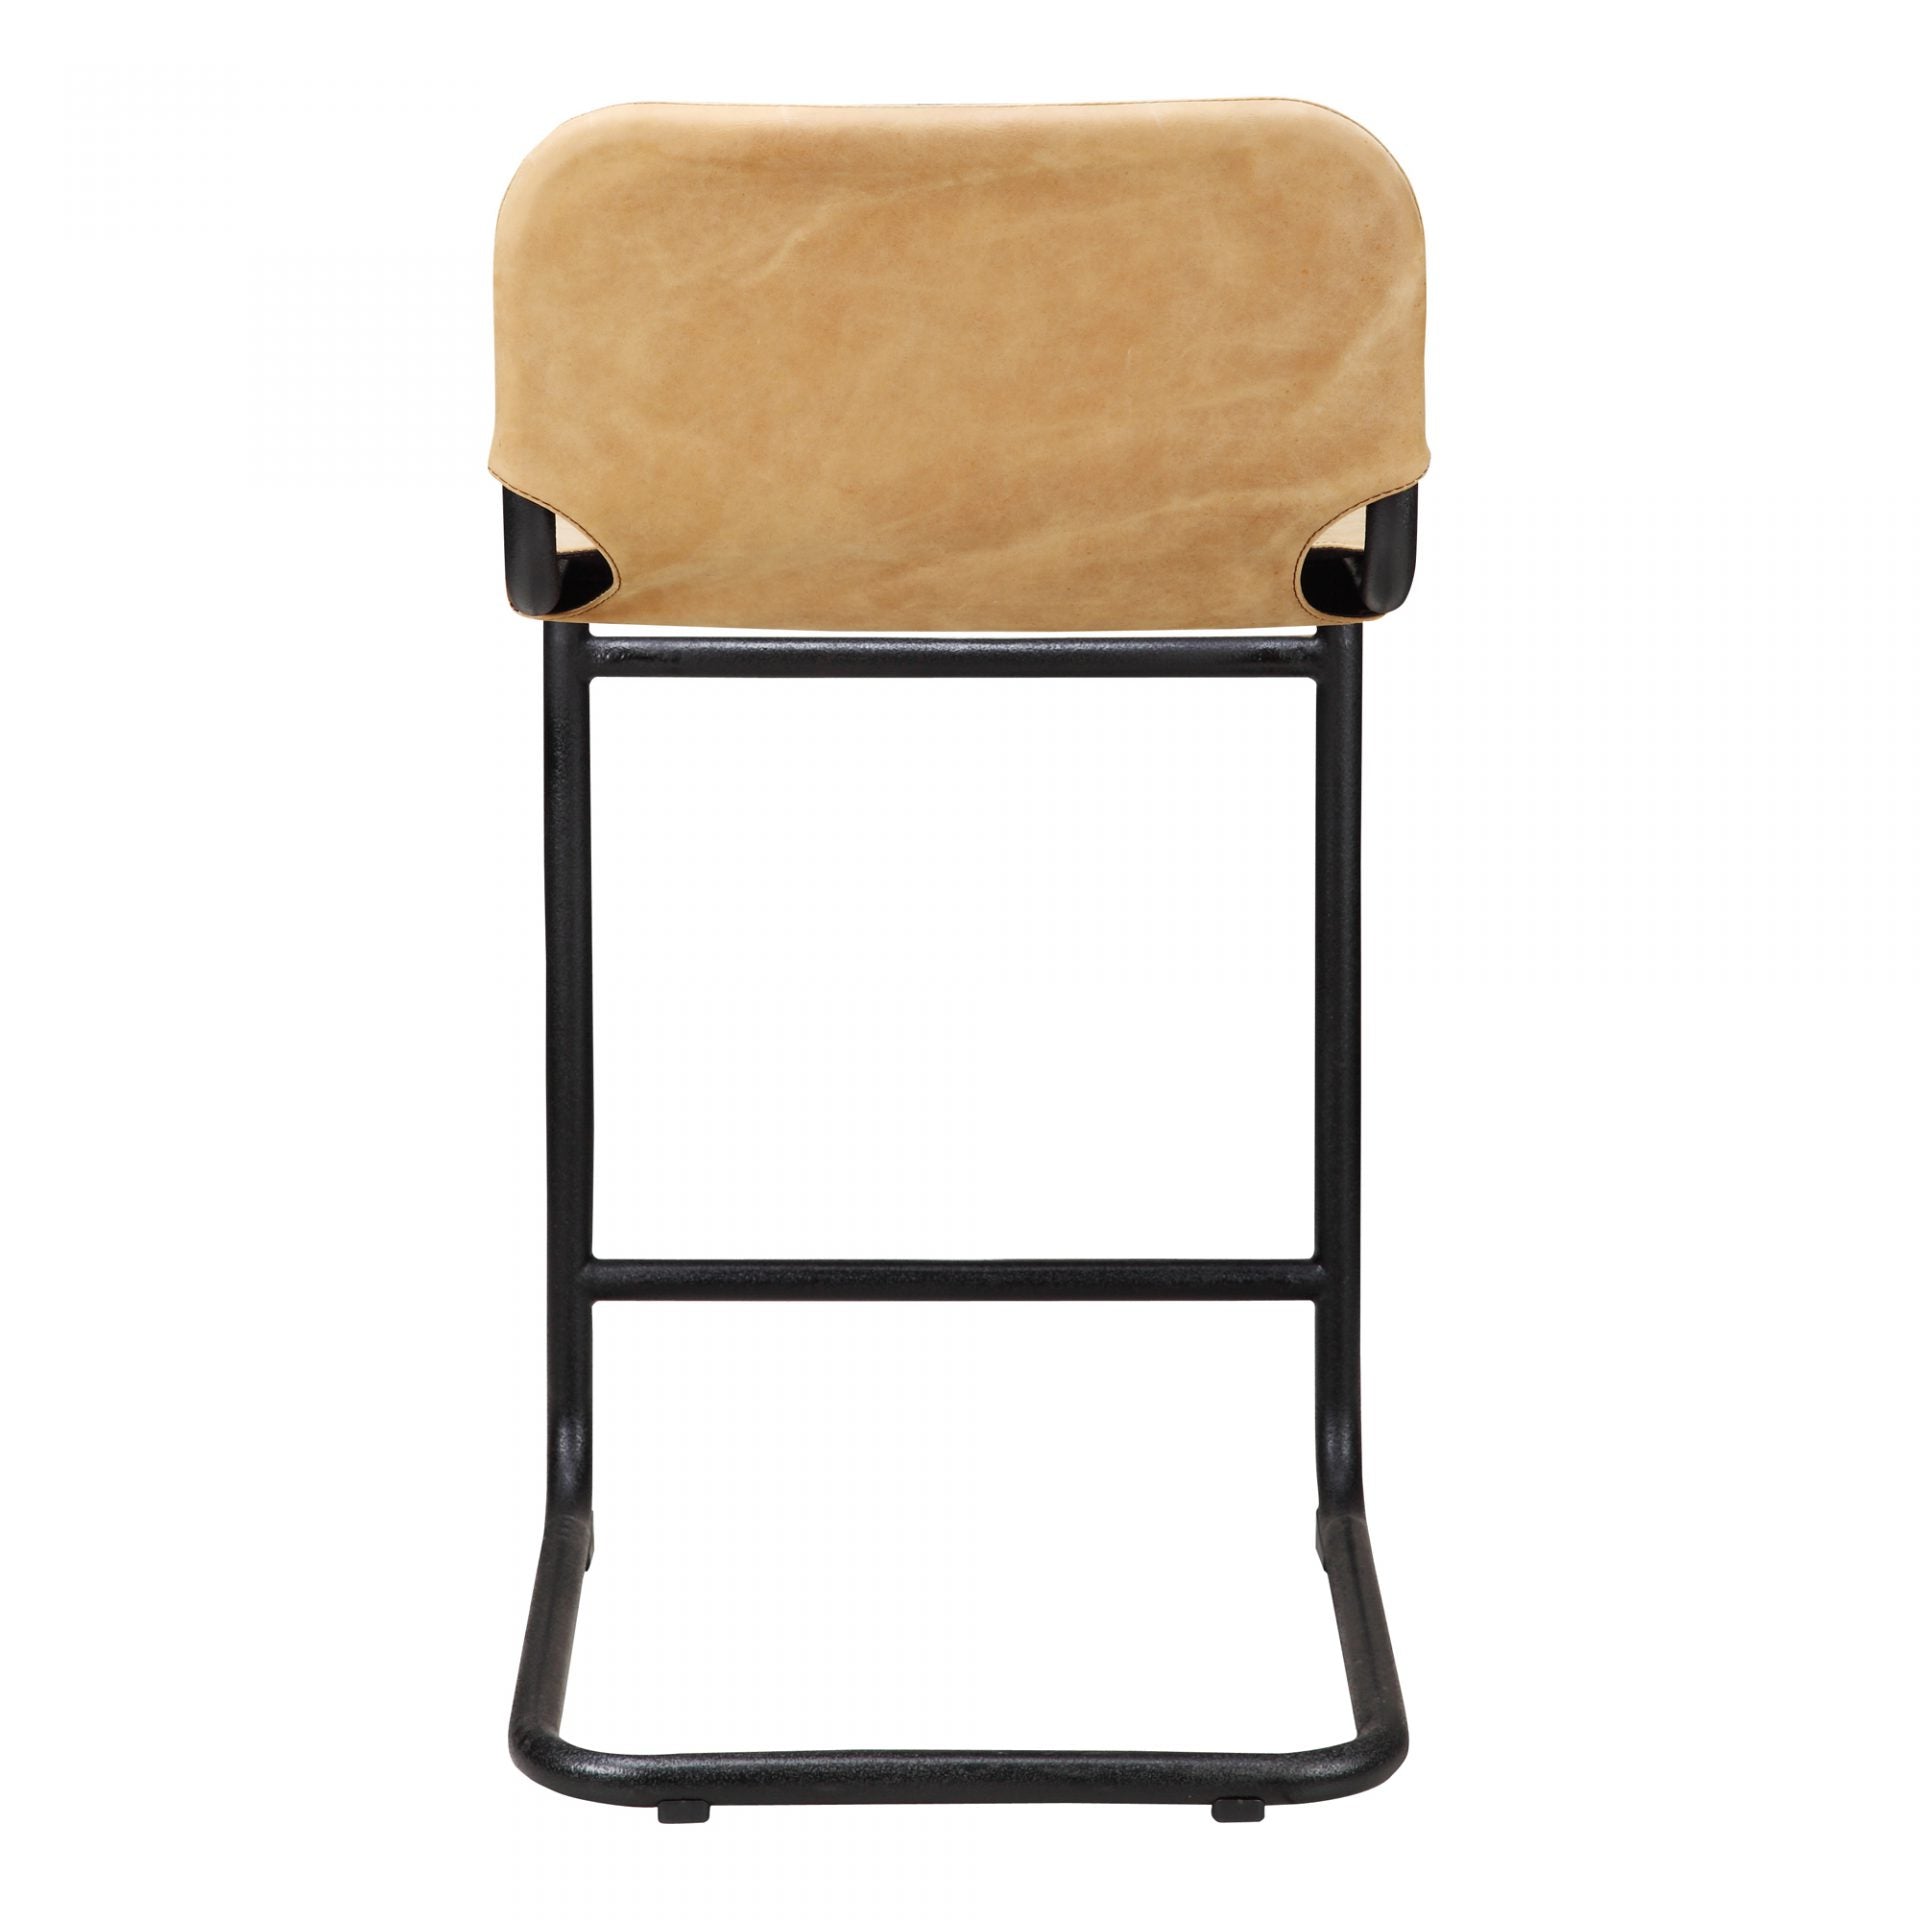 This Baker Counter Stool - Sunbaked Tan Leather has an ultra-supple tan leather seat, supported by a thick black iron frame. Sure to complete the look for any kitchen, island, or other area!   Size: 19"W x 21"D x 35"H